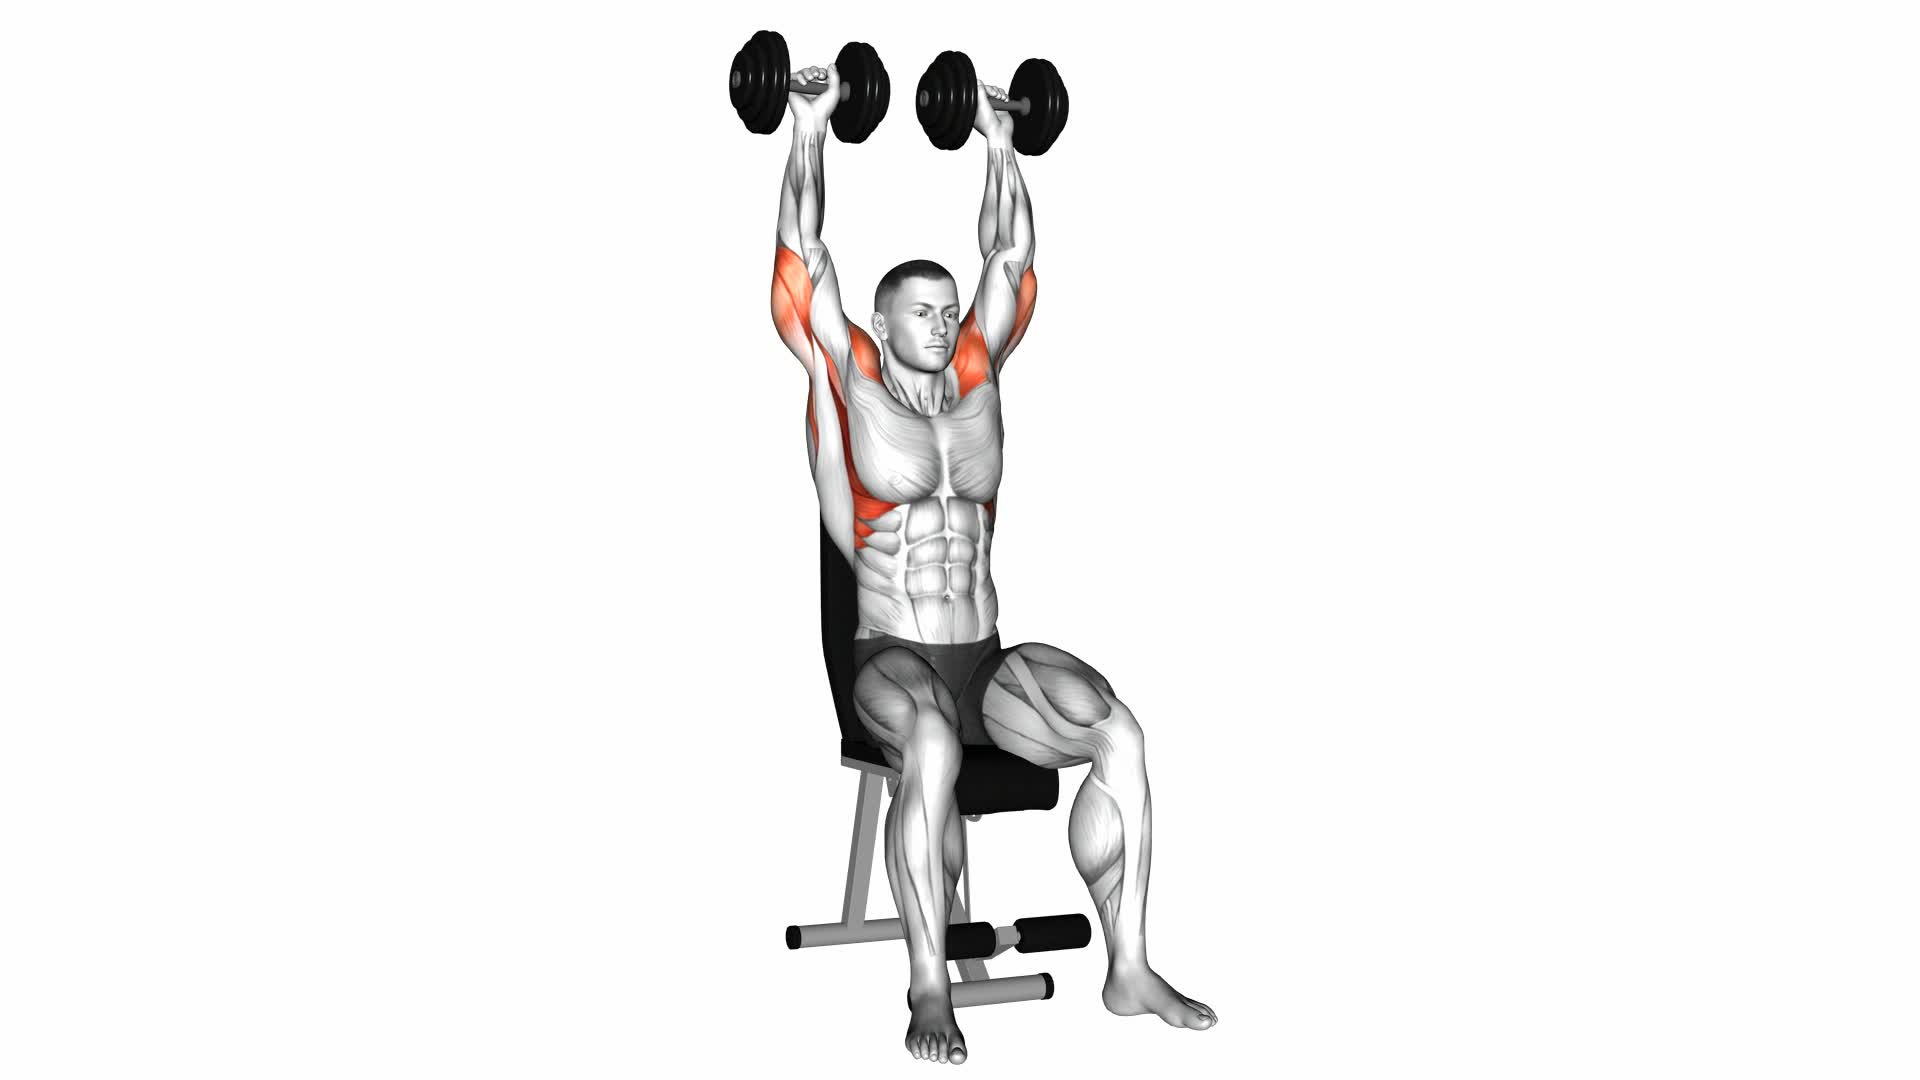 Dumbbell Arnold Press - Video Exercise Guide & Tips